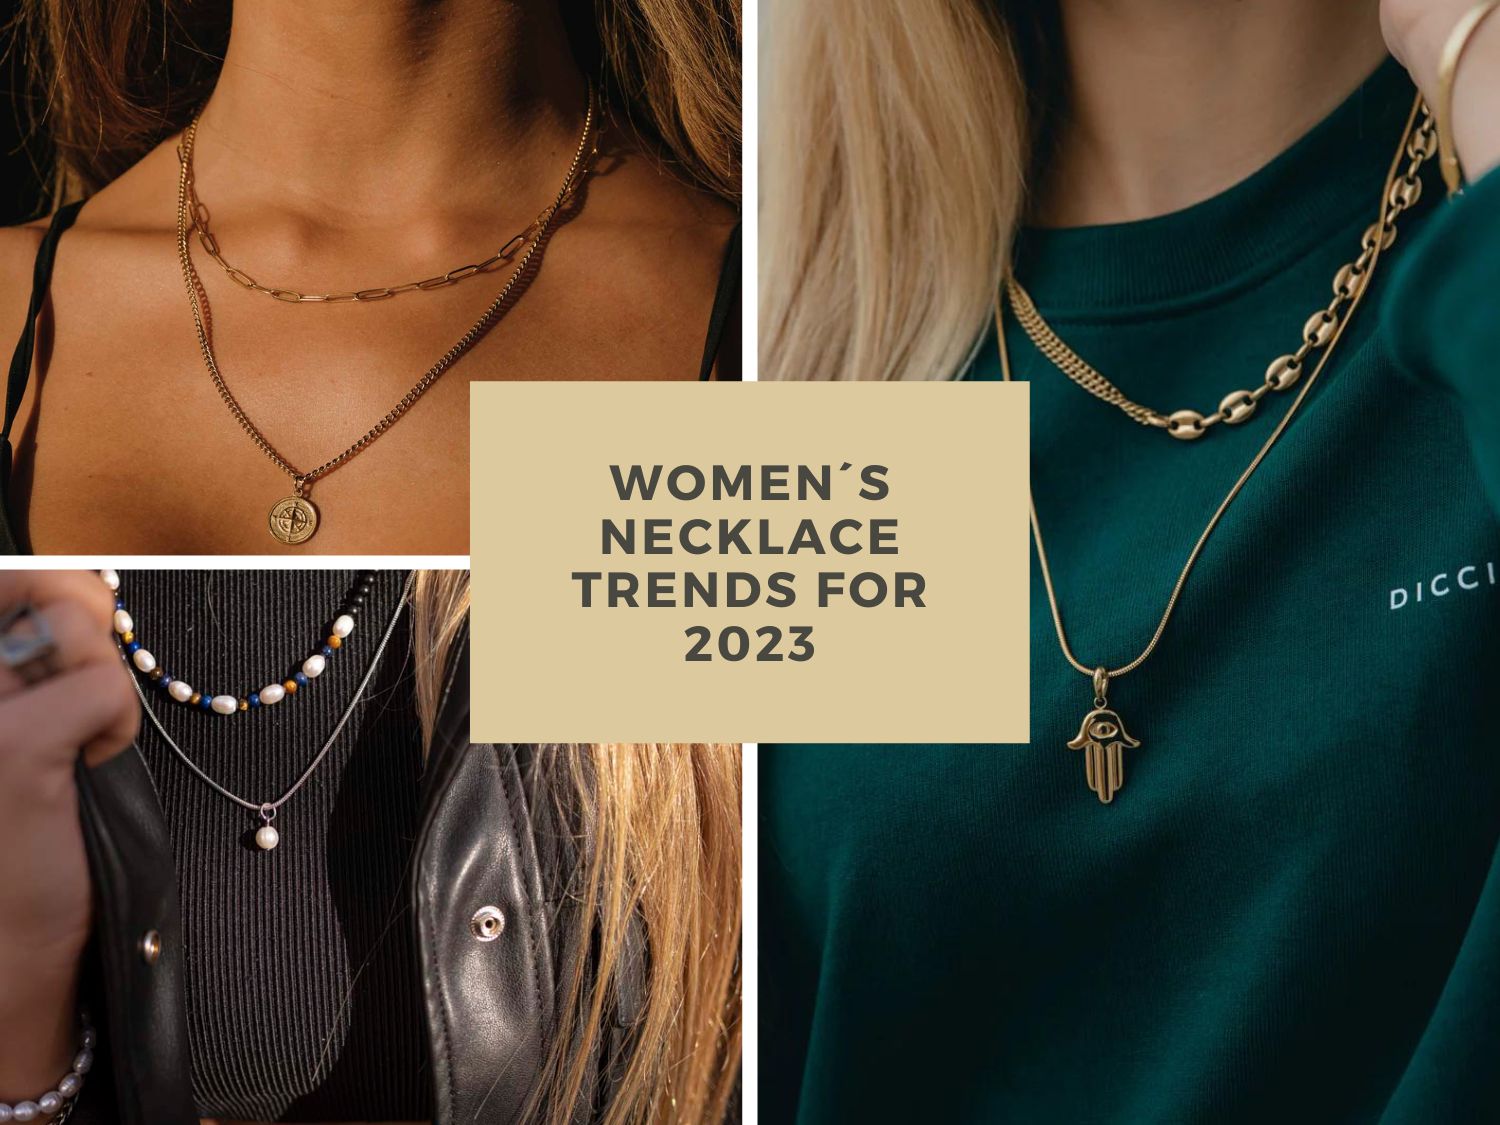 WOMEN'S NECKLACE TRENDS - UPGRADE YOUR STYLE IN 2023